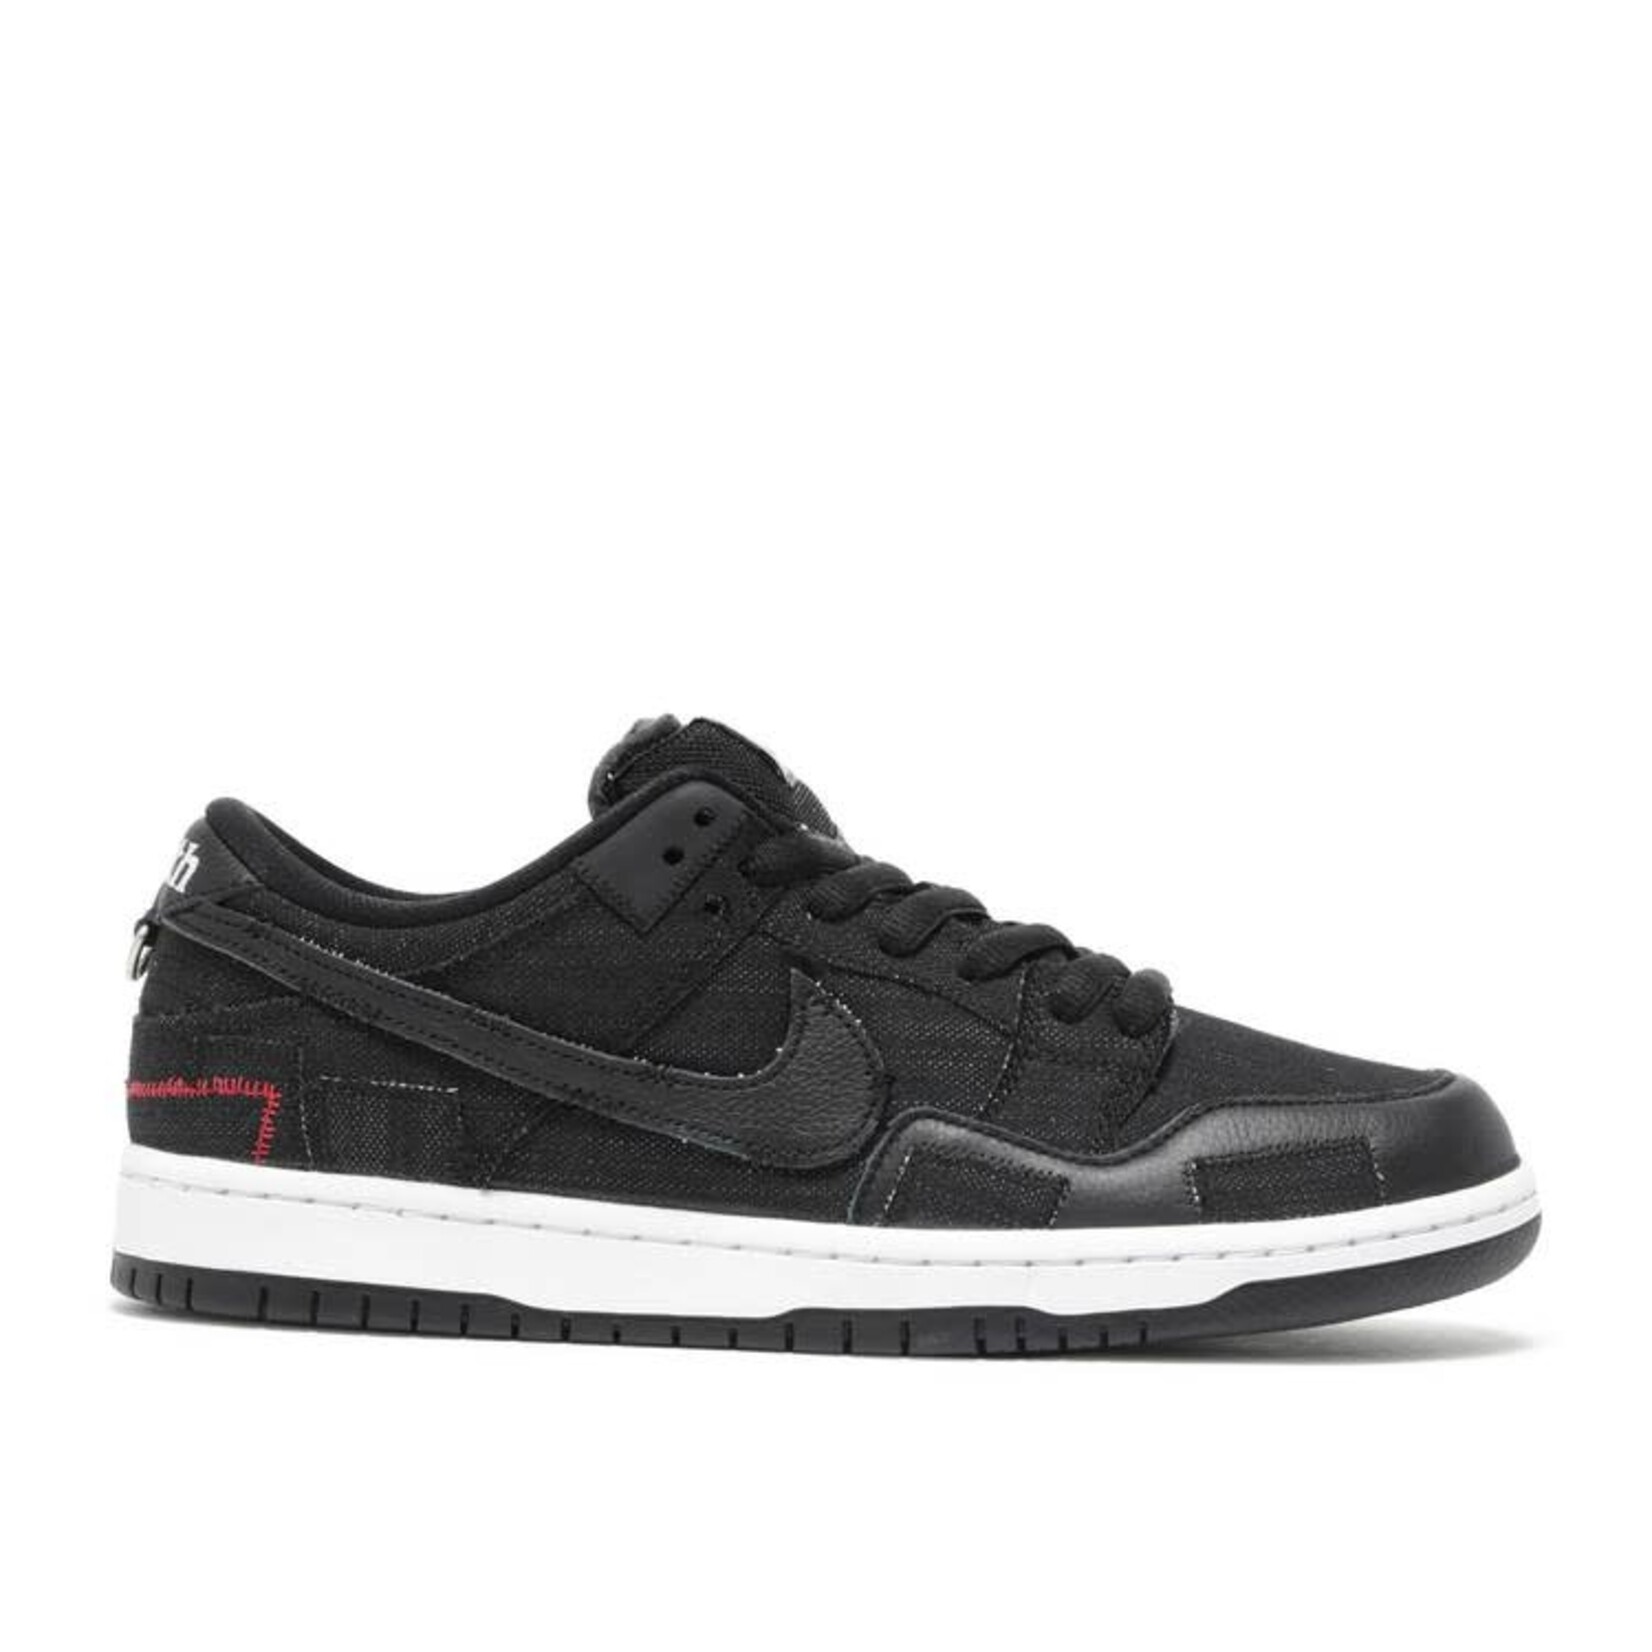 Nike Nike SB Dunk Low Wasted Youth Size 10.5, DS BRAND NEW